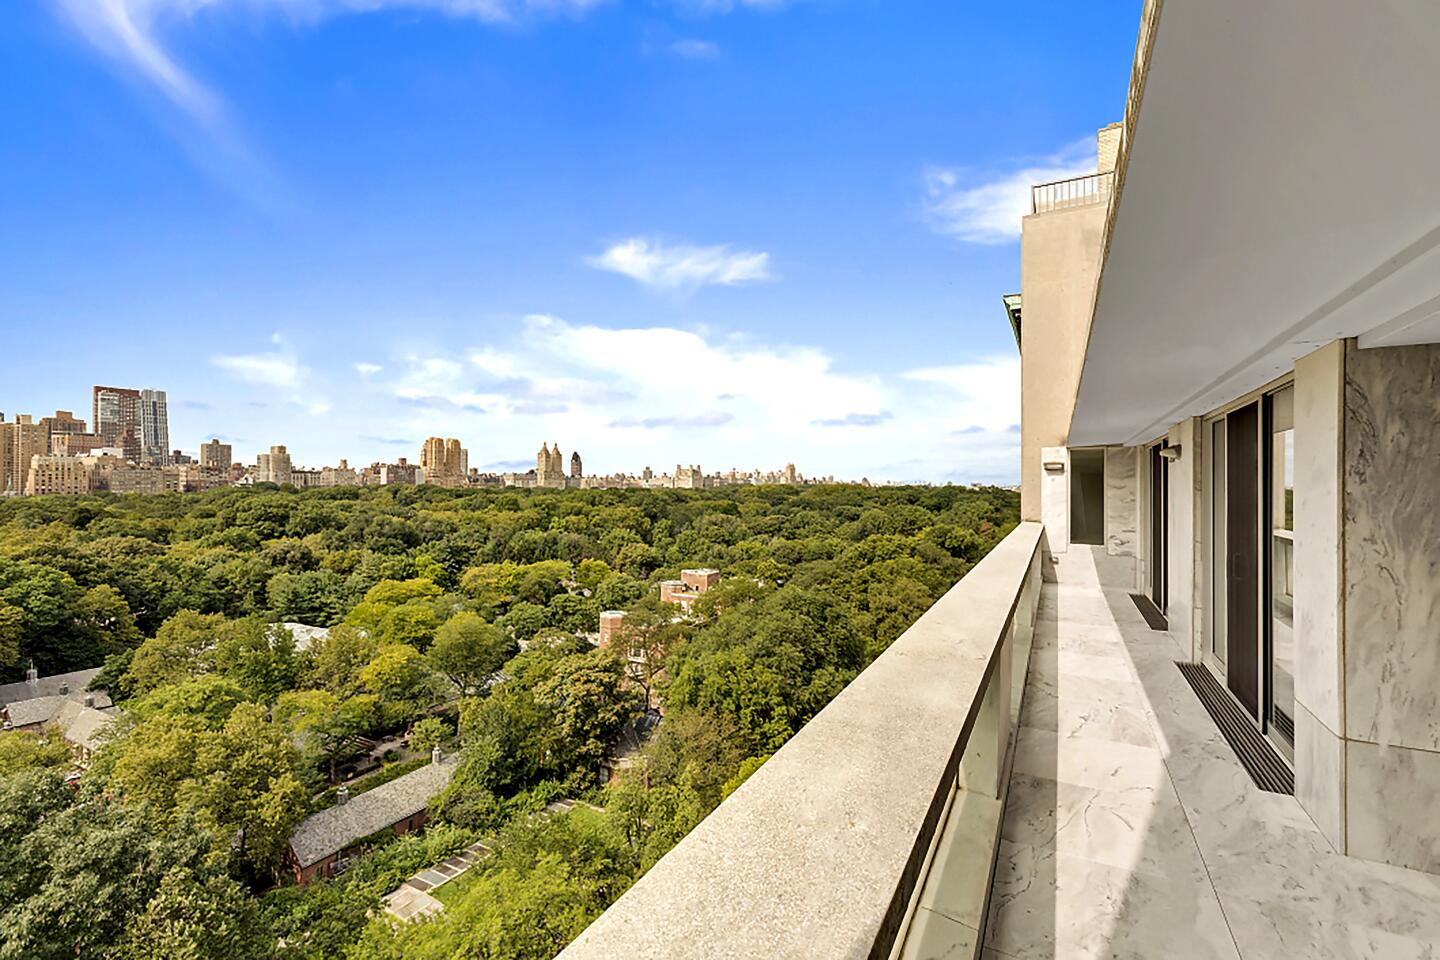 The Rockefeller family's Manhattan apartment balcony with another view of Central Park